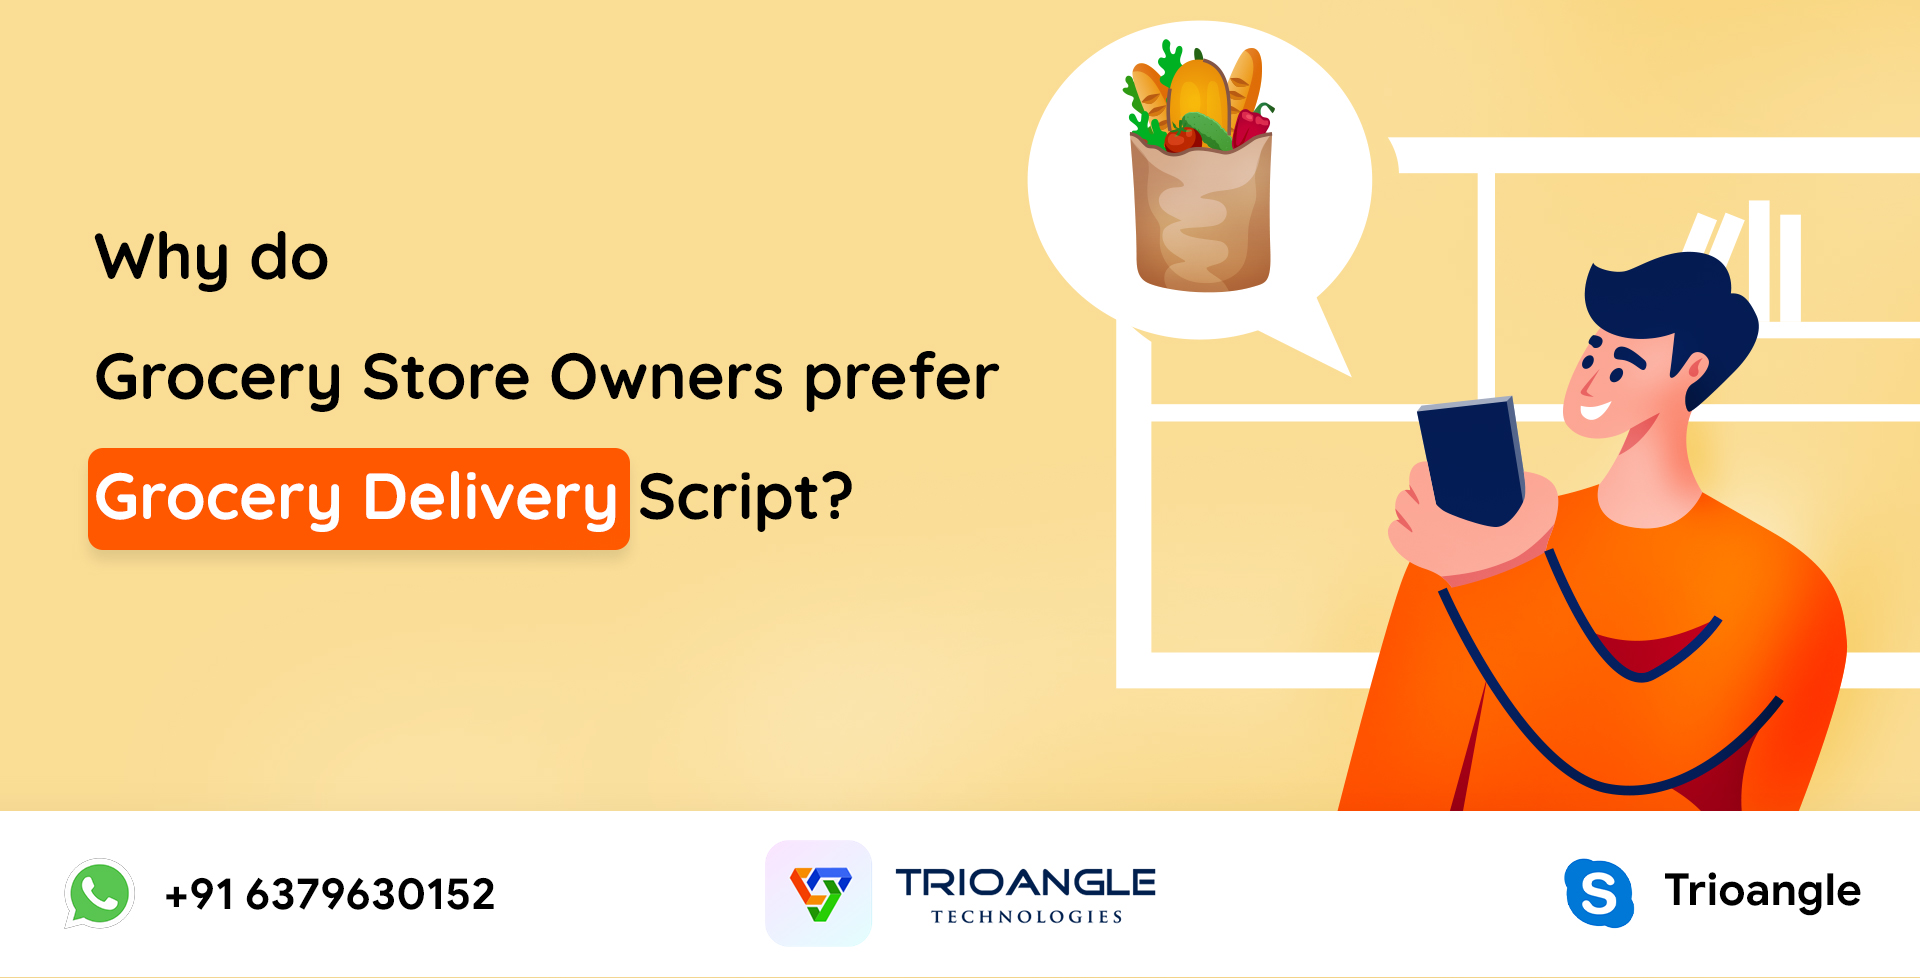 Why do Grocery Store Owners prefer Grocery Delivery Script?